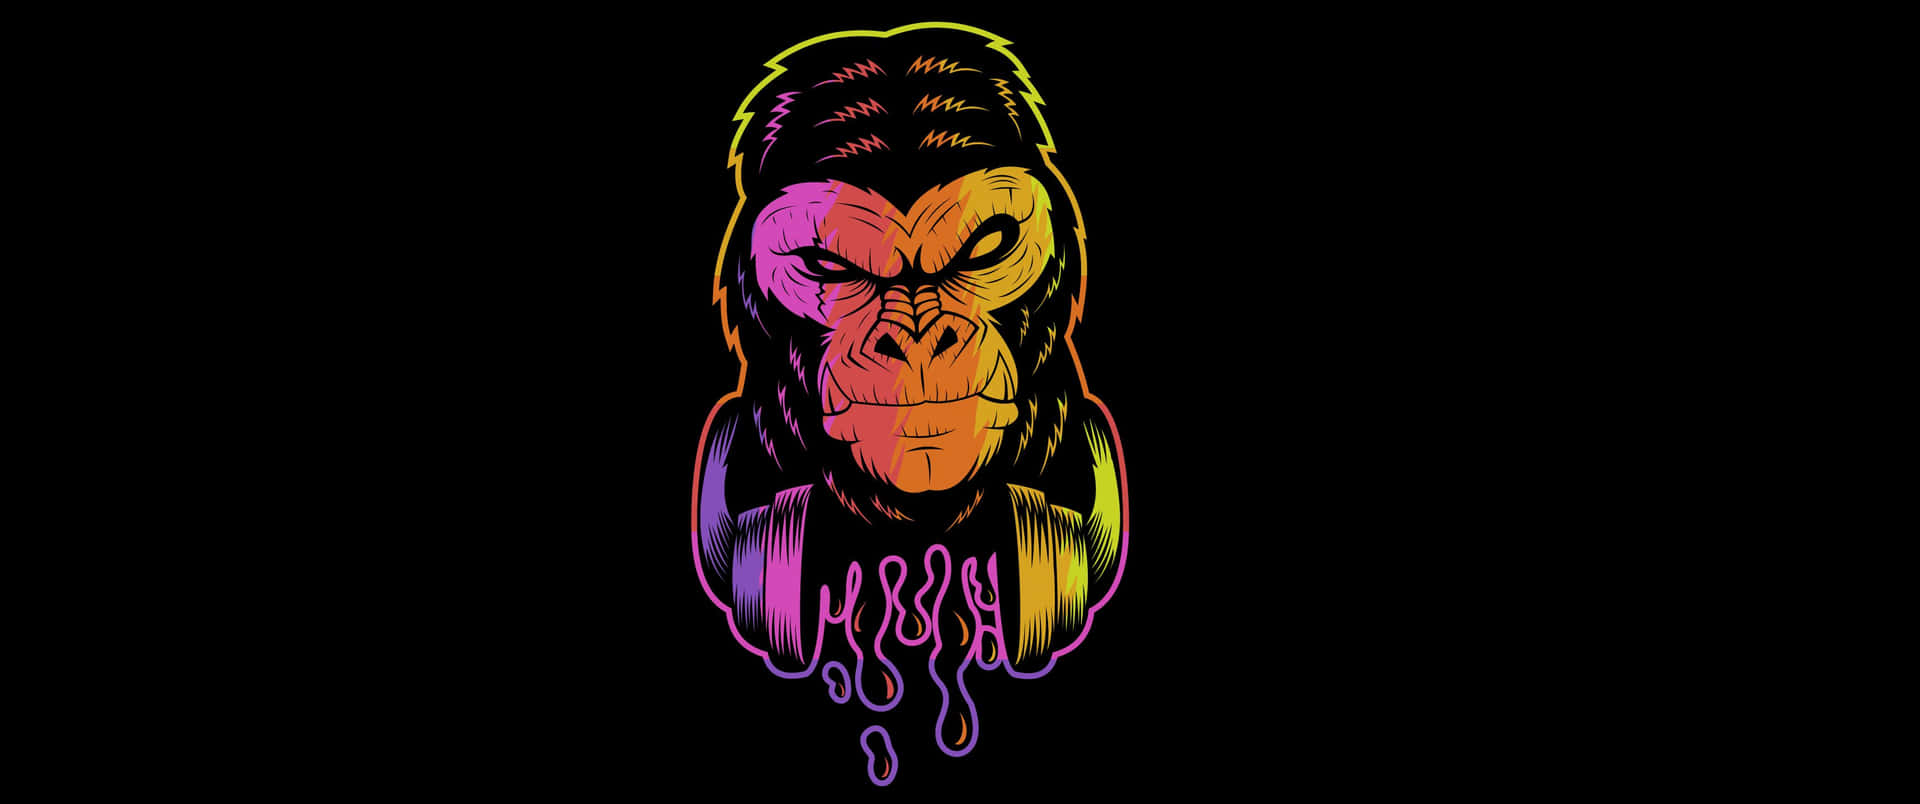 3440x1440p Gorilla Pink And Yellow Aesthetic Background